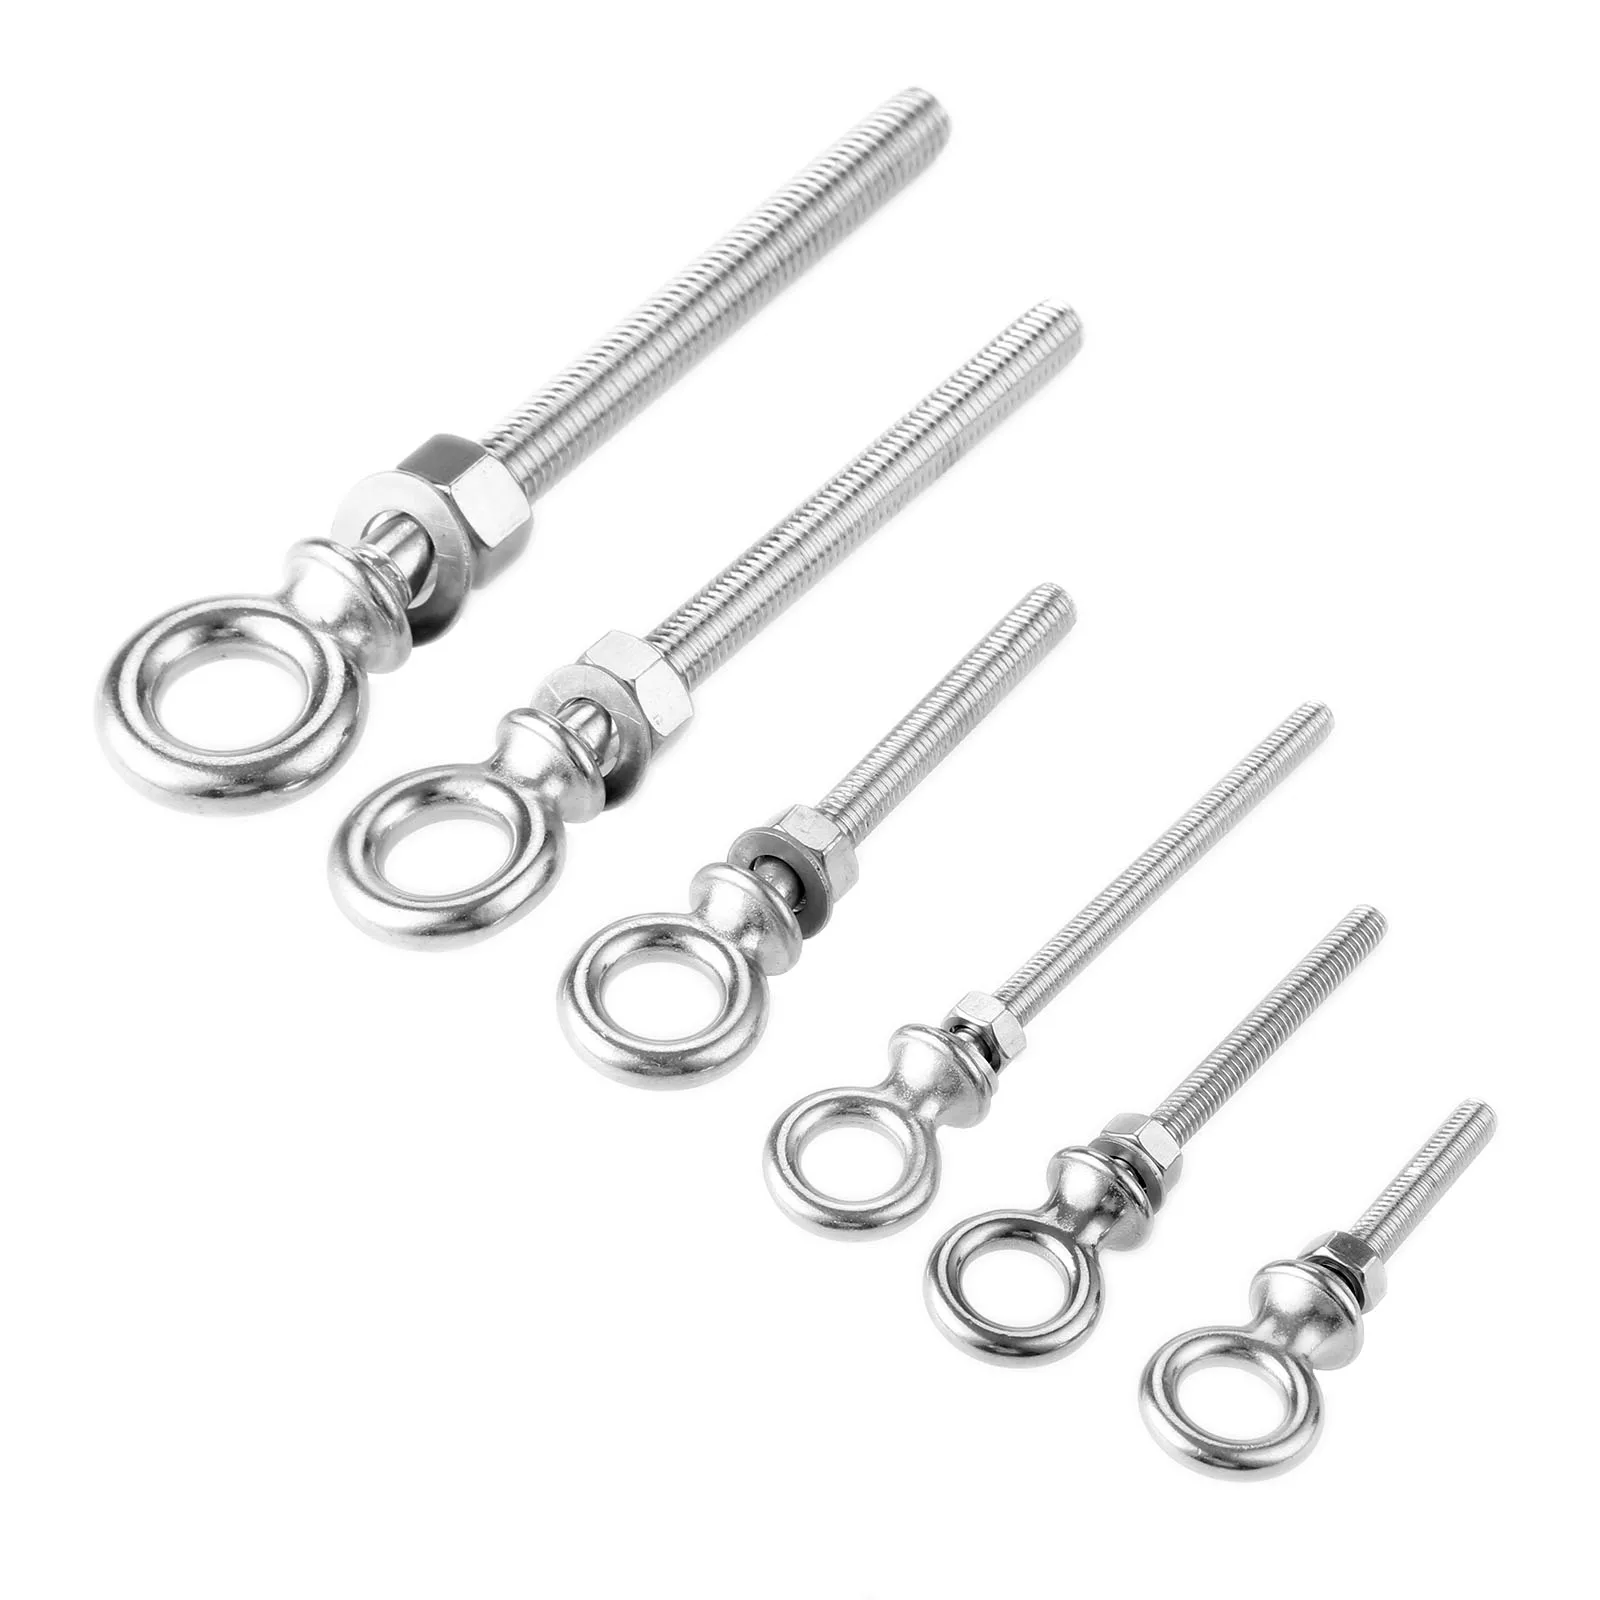 1pc 316 Stainless Steel Lifting Eye Screw Bolts M6 M8 M10 M12 Long Shank Collared Casting Round Ring Hook Bolt Screw Fasterners